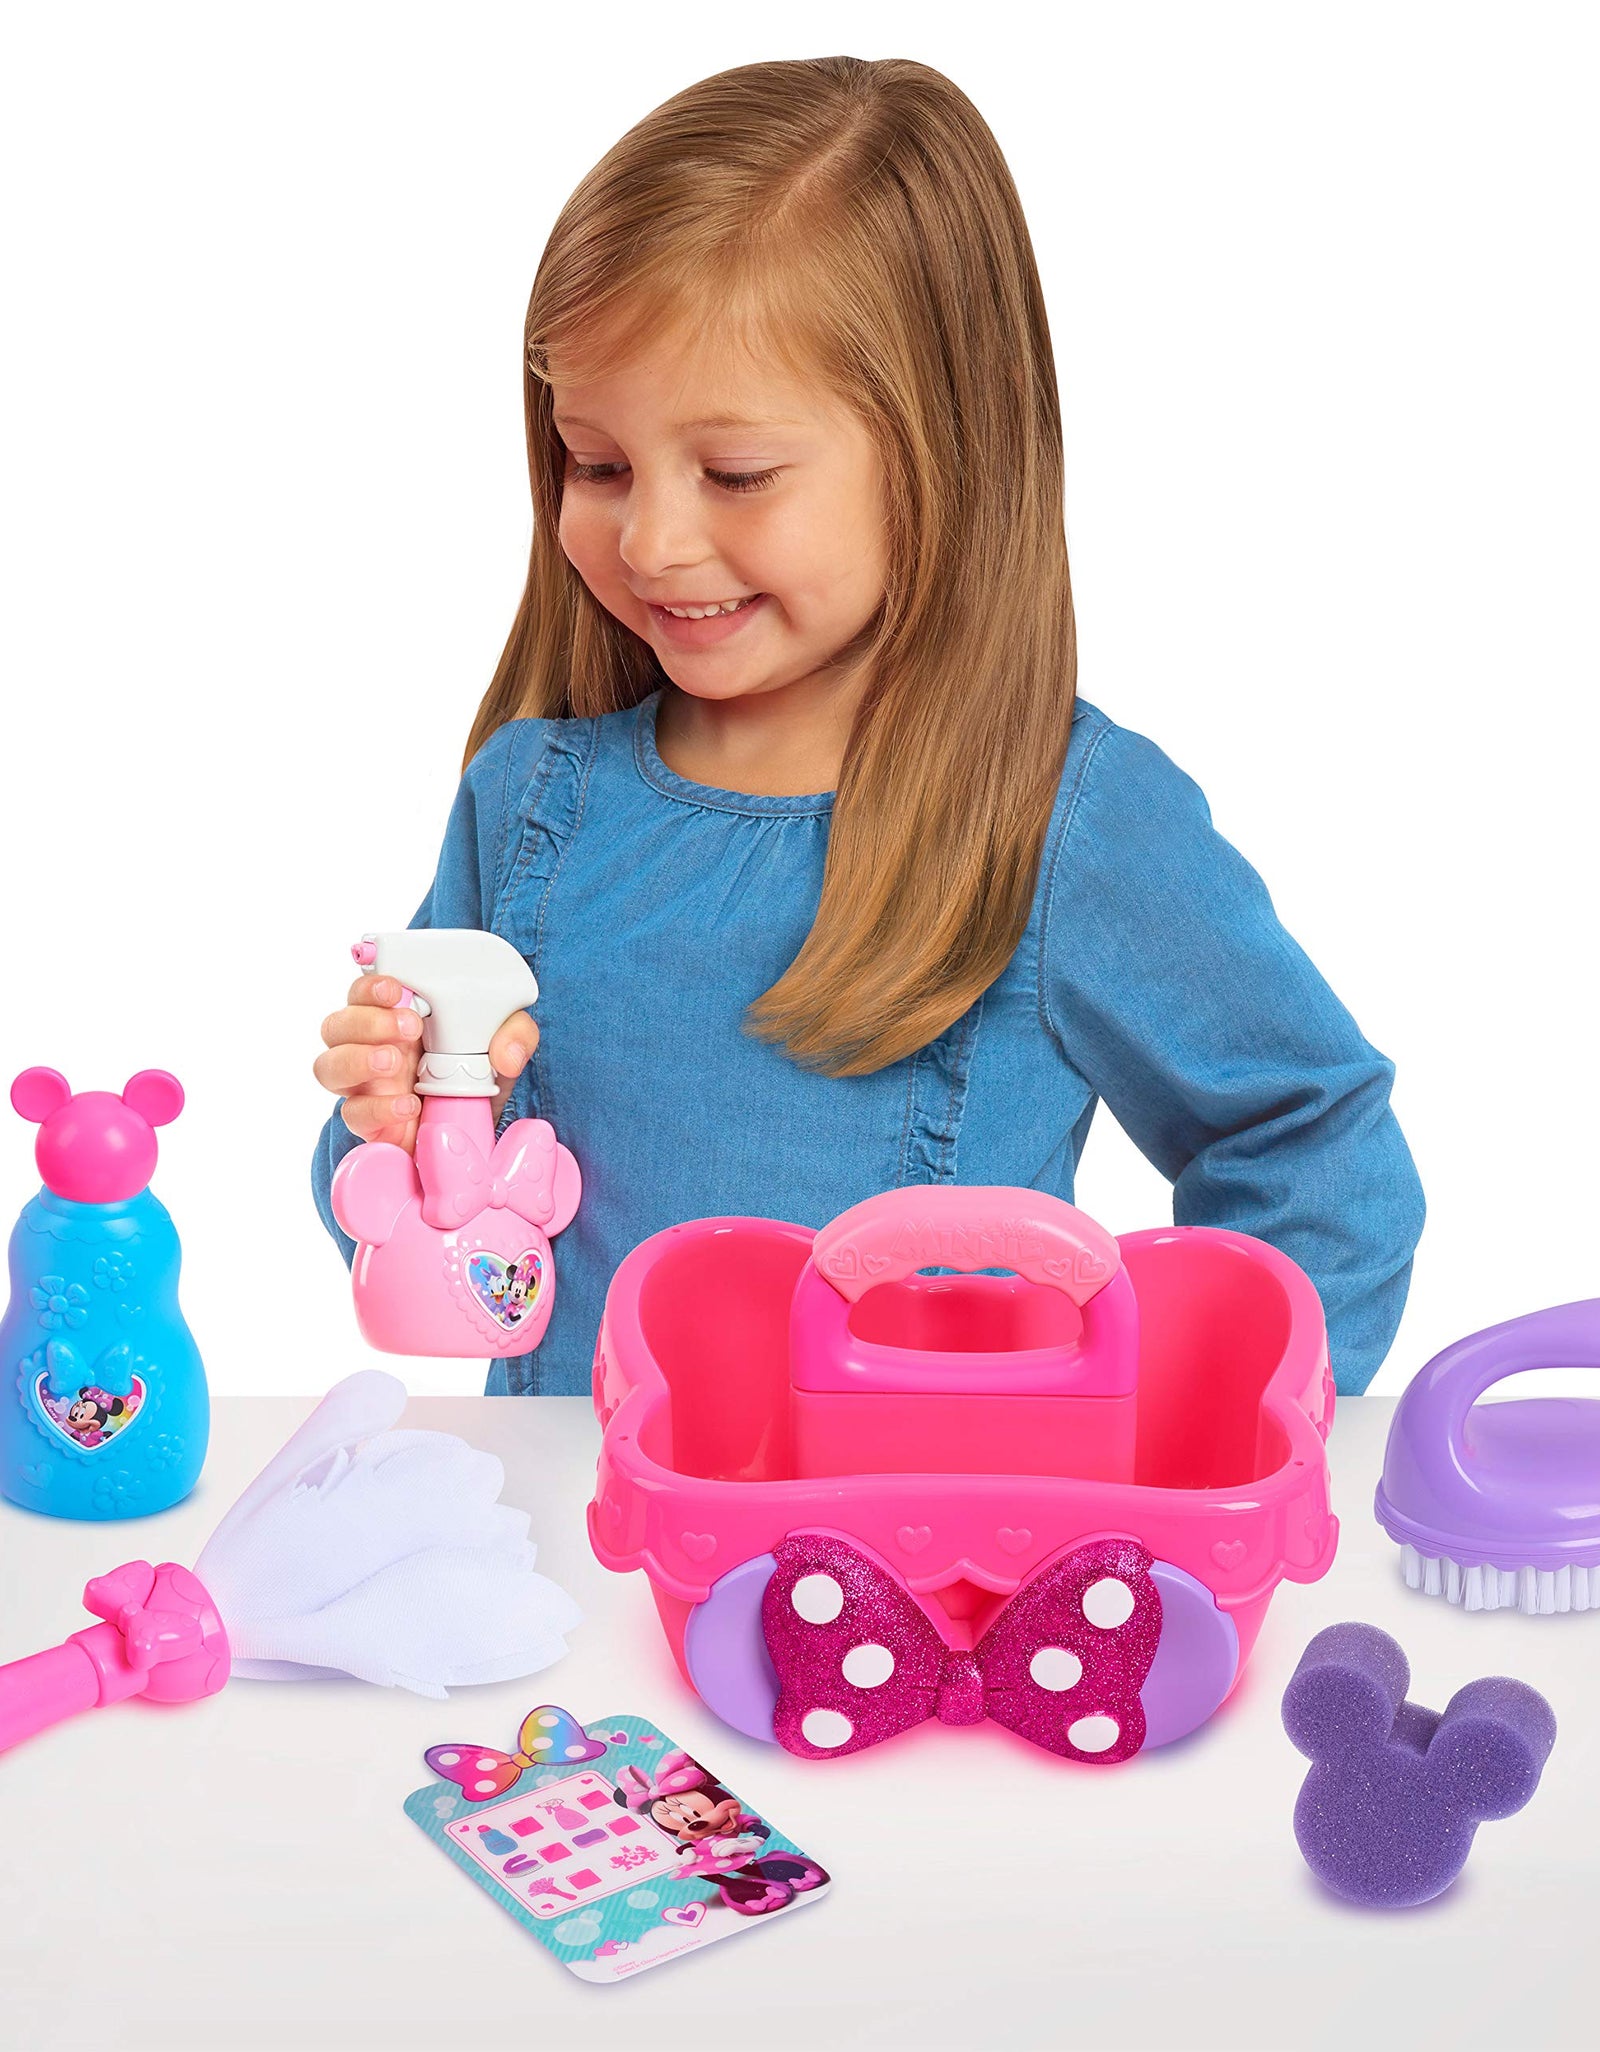 Minnie's Happy Helpers Sparkle N' Clean Caddy, by Just Play